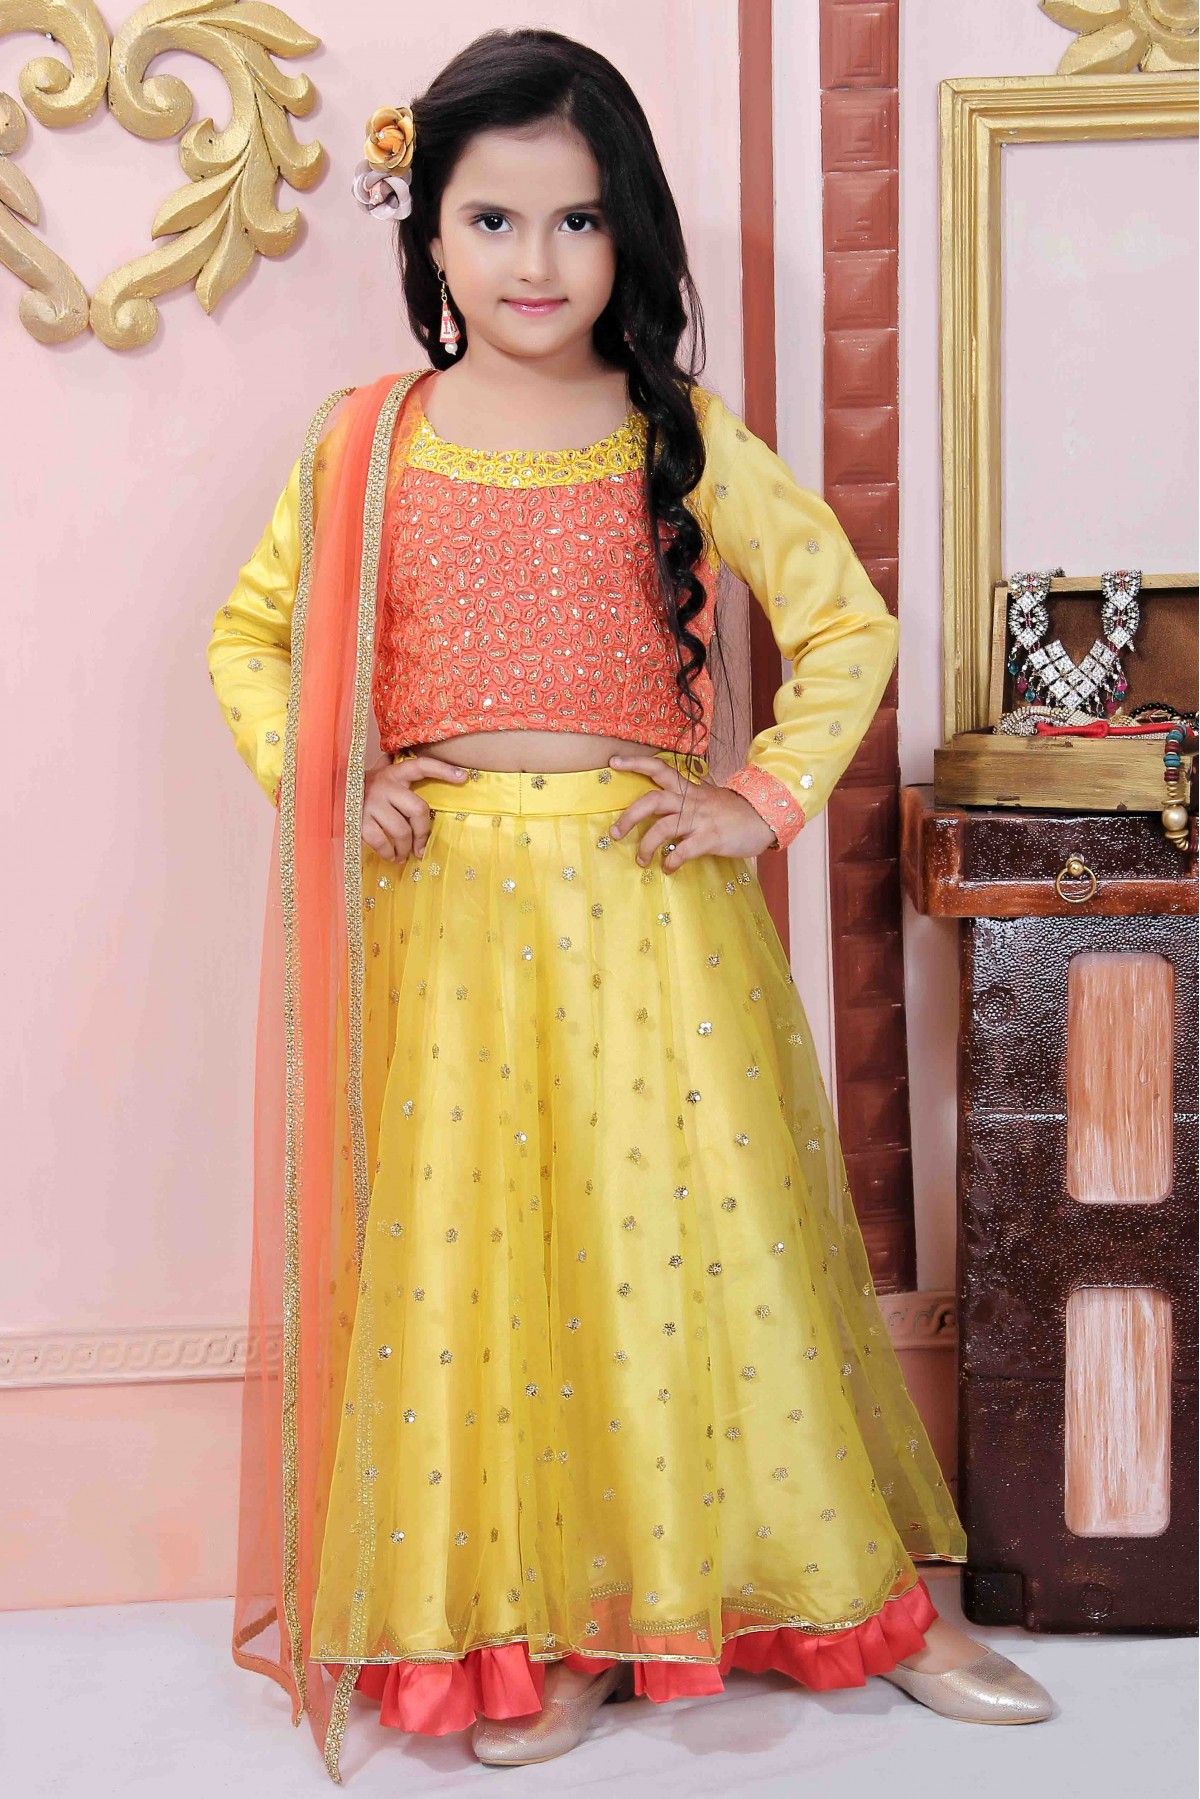 ADIVA Girl's Indian Party Wear Lehenga Choli for Kids - E-COMMERCE BUSINESS  WITH ASIA EASY WAY TO BRING PRODUCTS AMERICAN MARKETS